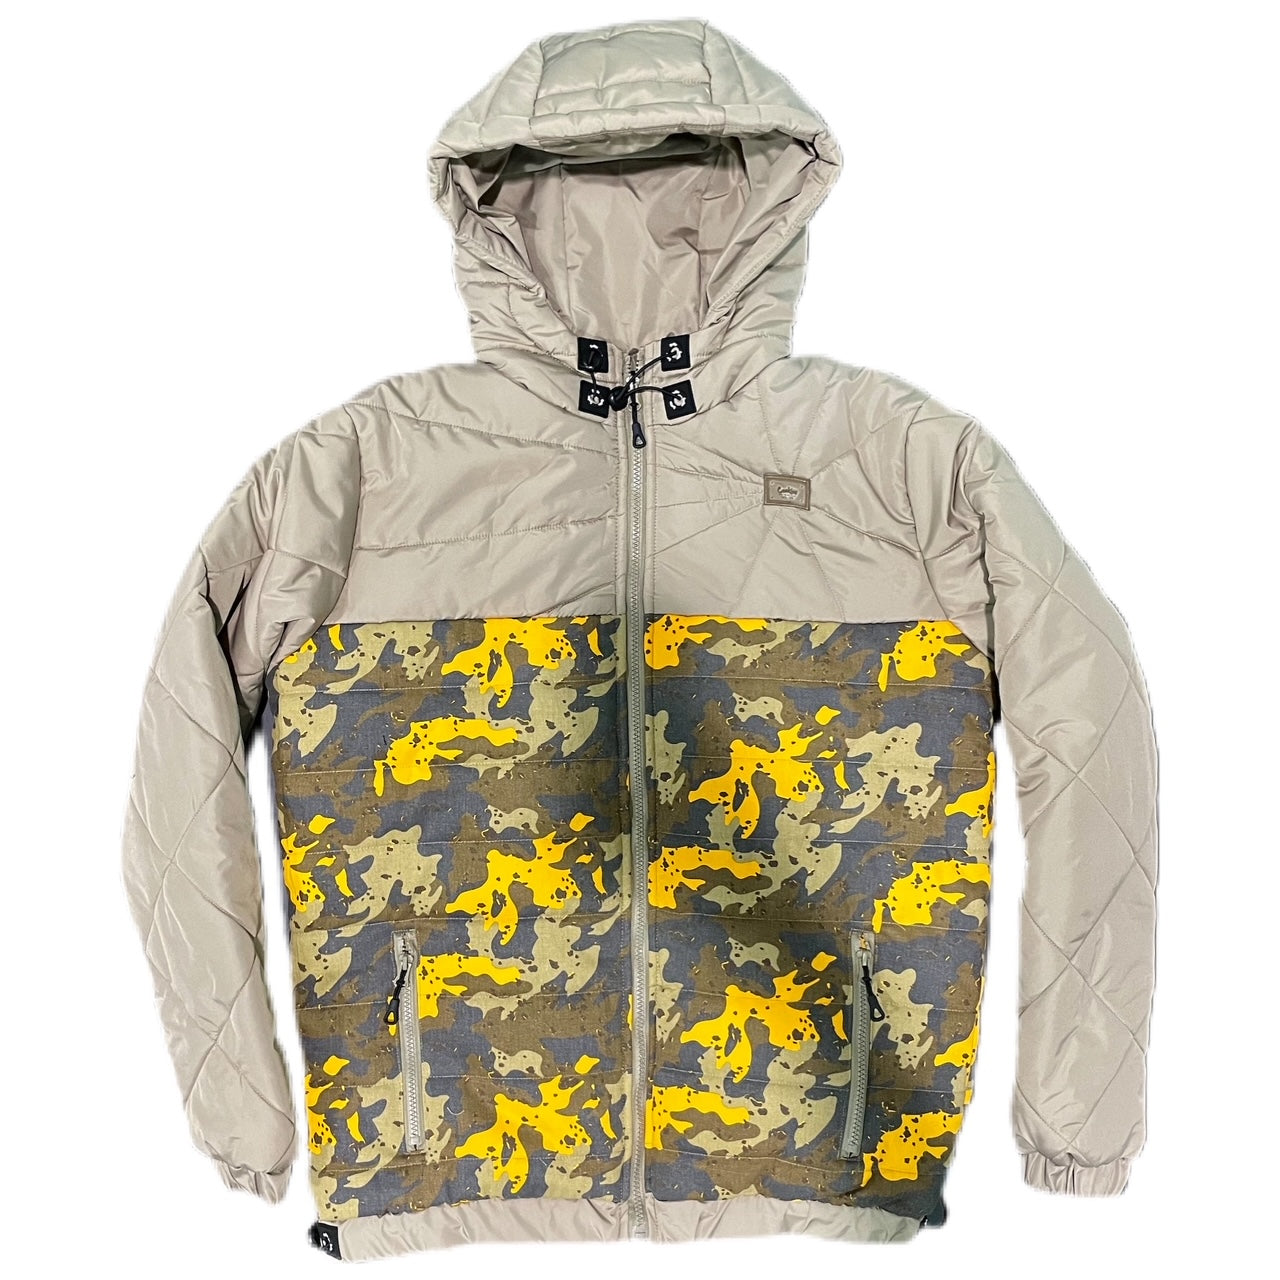 MENDOCINO QUILTED NYLON HOODED JACKET W/ CAMO PRINTED CANVAS (MOCHA)